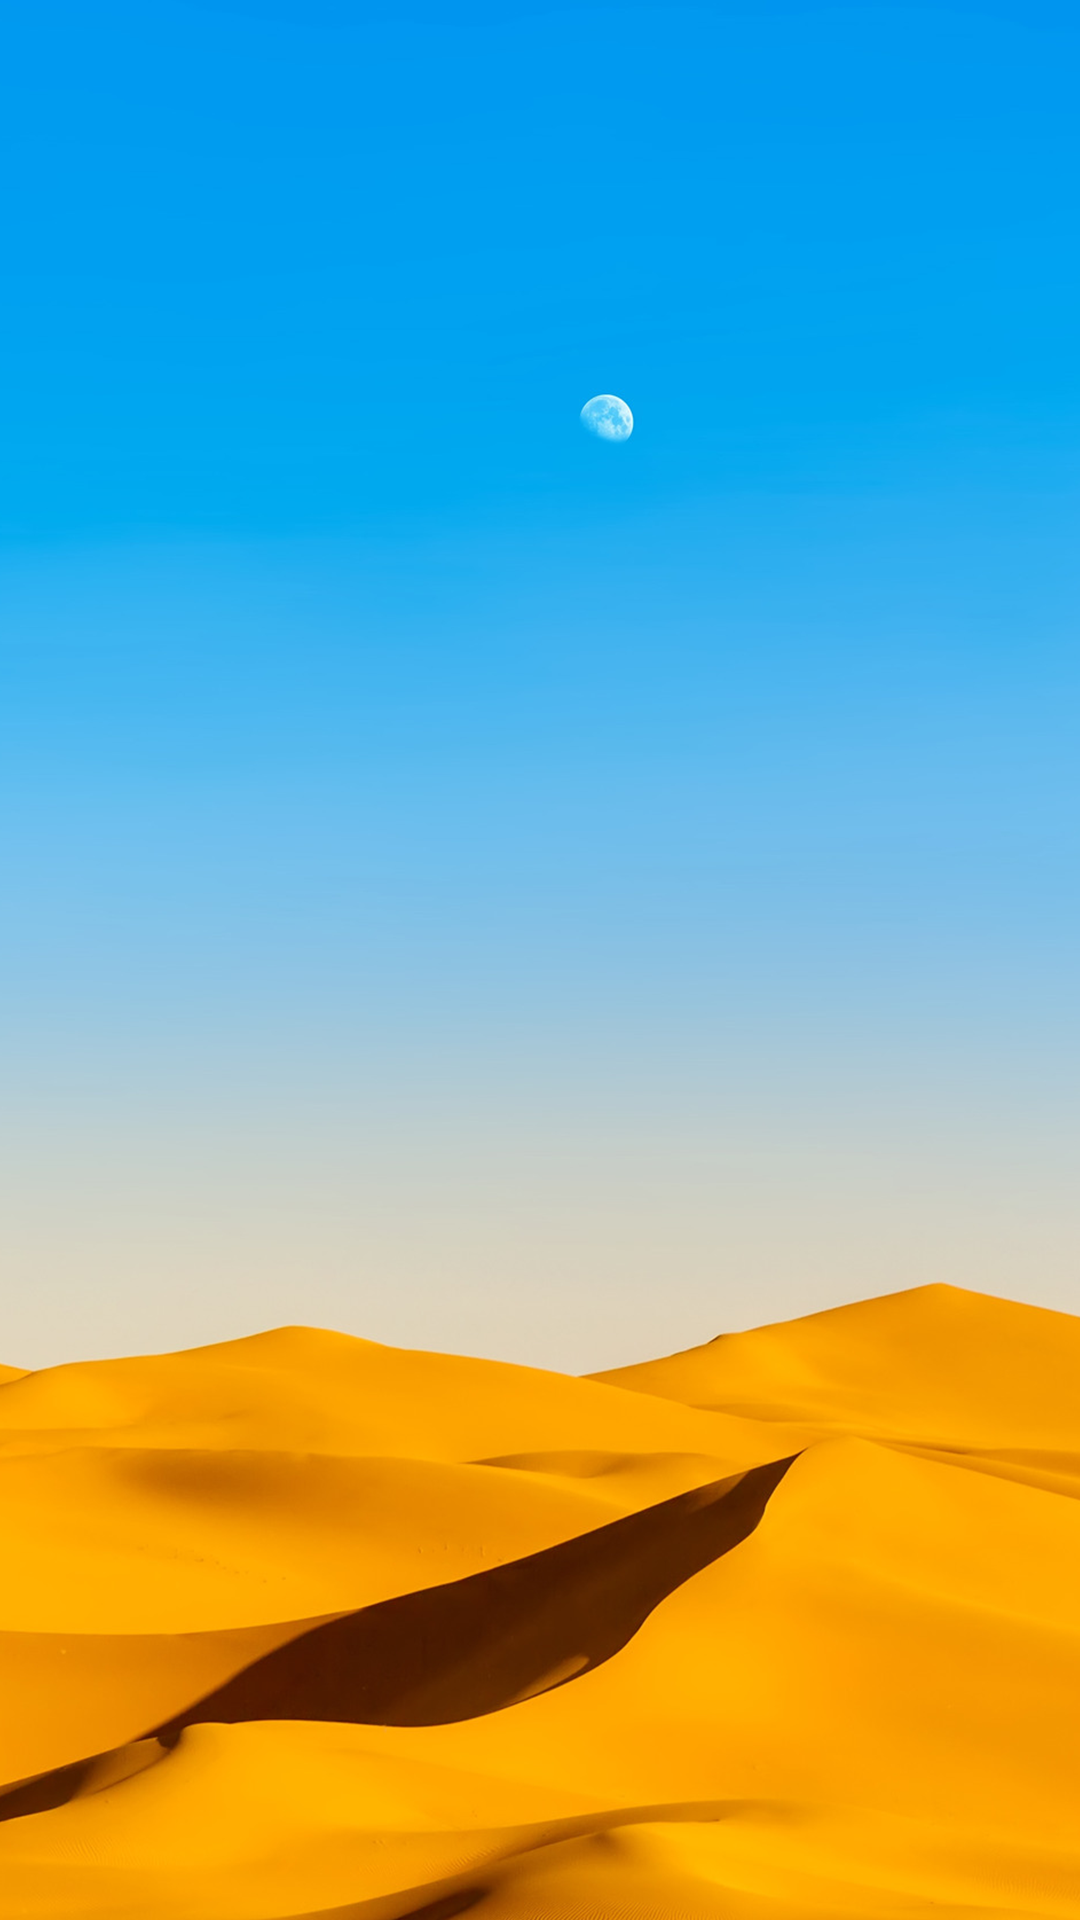 android-stock-wallpapers-1080x1920-Yun-OS-Stock-Wall-NewsExprez.png